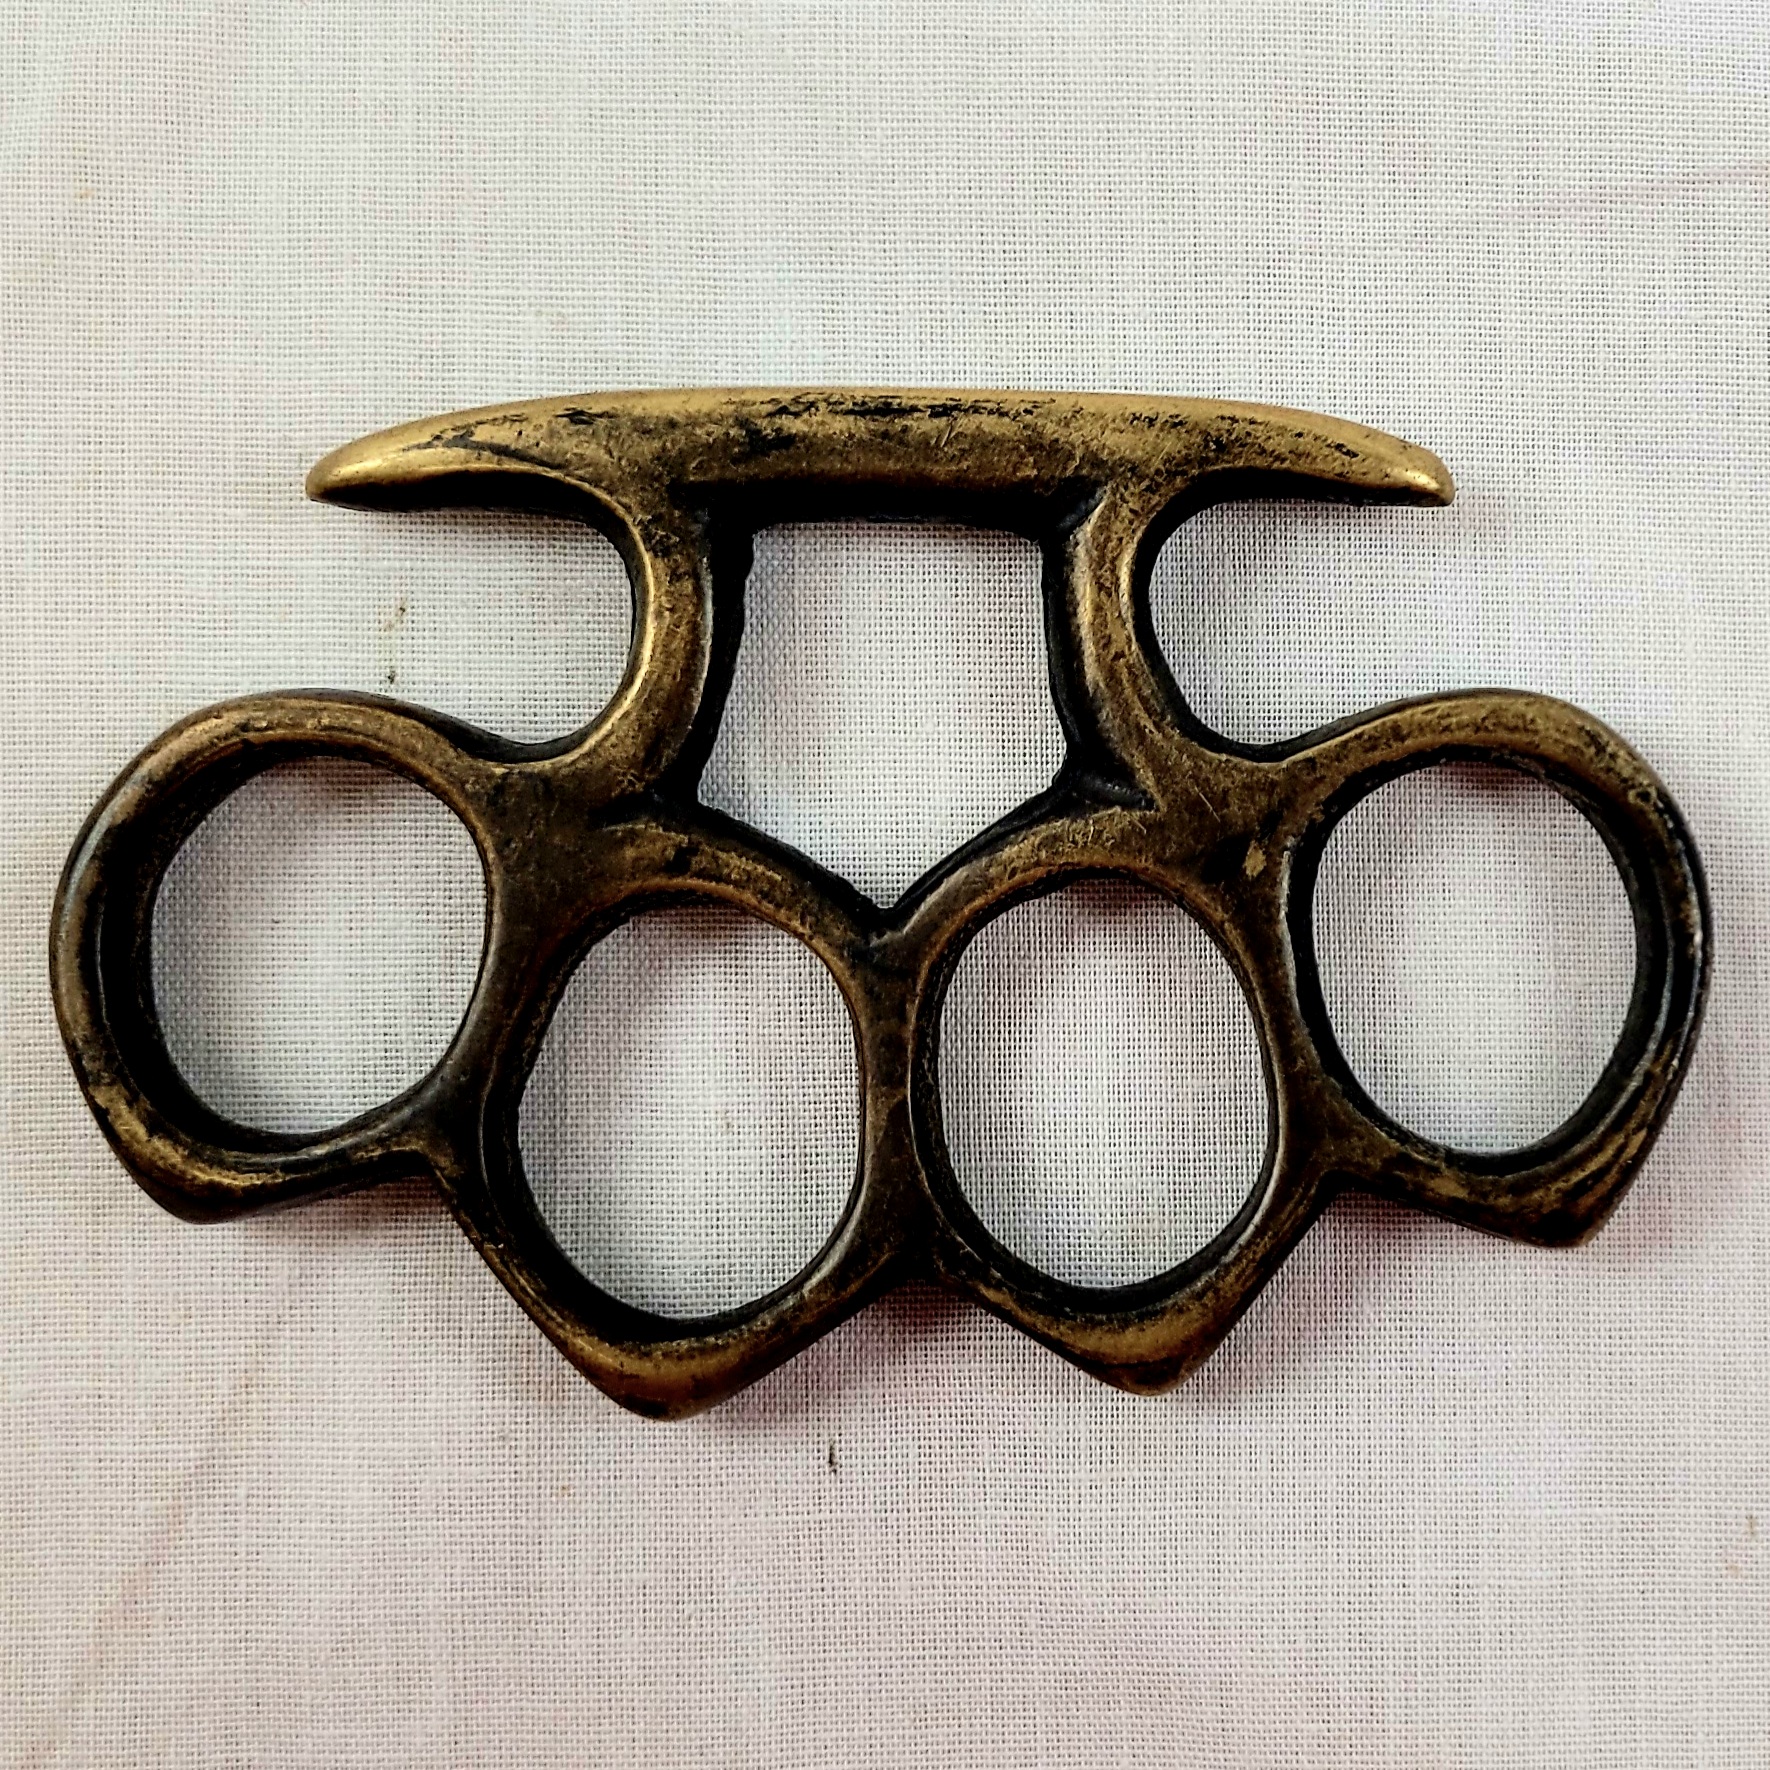 Ww1 Trench Fighting Knuckle Dusters Sally Antiques